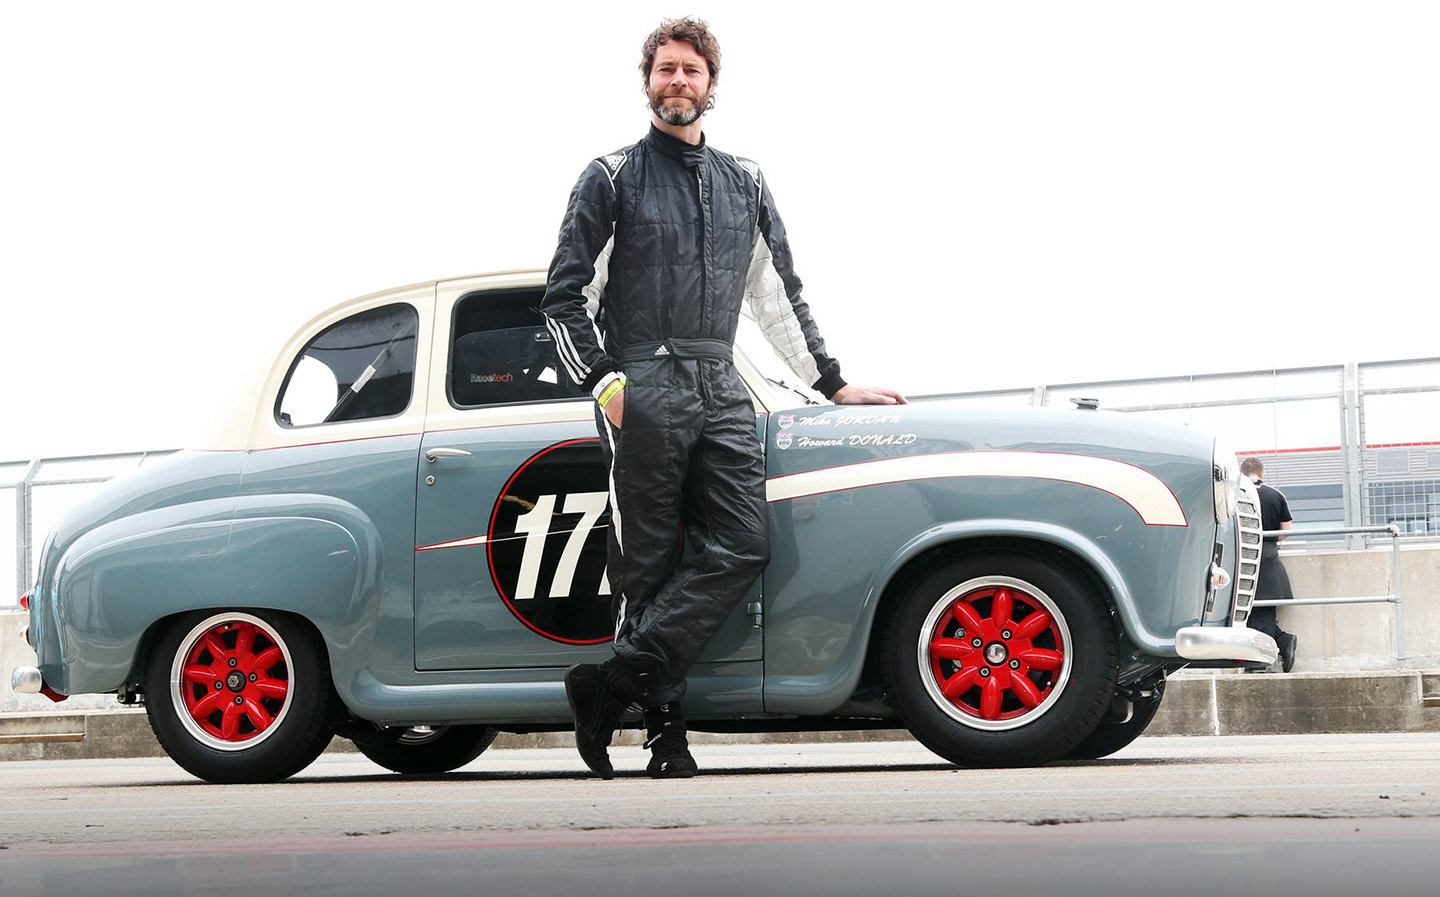 Howard Donald interview ahead of the Take That singer's celebrity race at the 2017 Silverstone Classic, for Sunday Times Driving's Me and My Motor